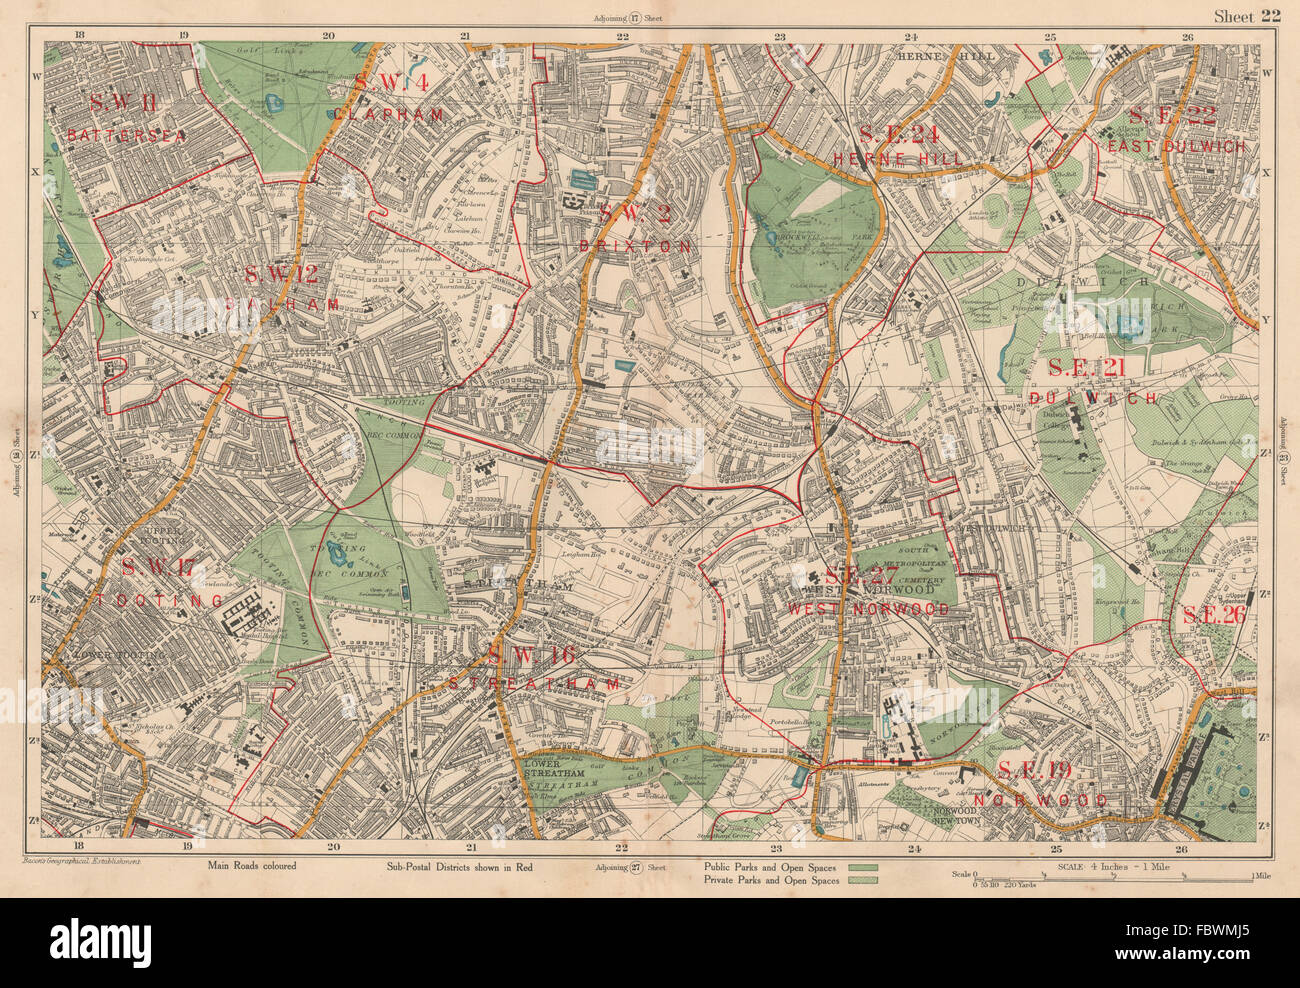 STREATHAM W Norwood Brixton Balham Tooting Dulwich Herne Hill. BACON, 1927 map Stock Photo